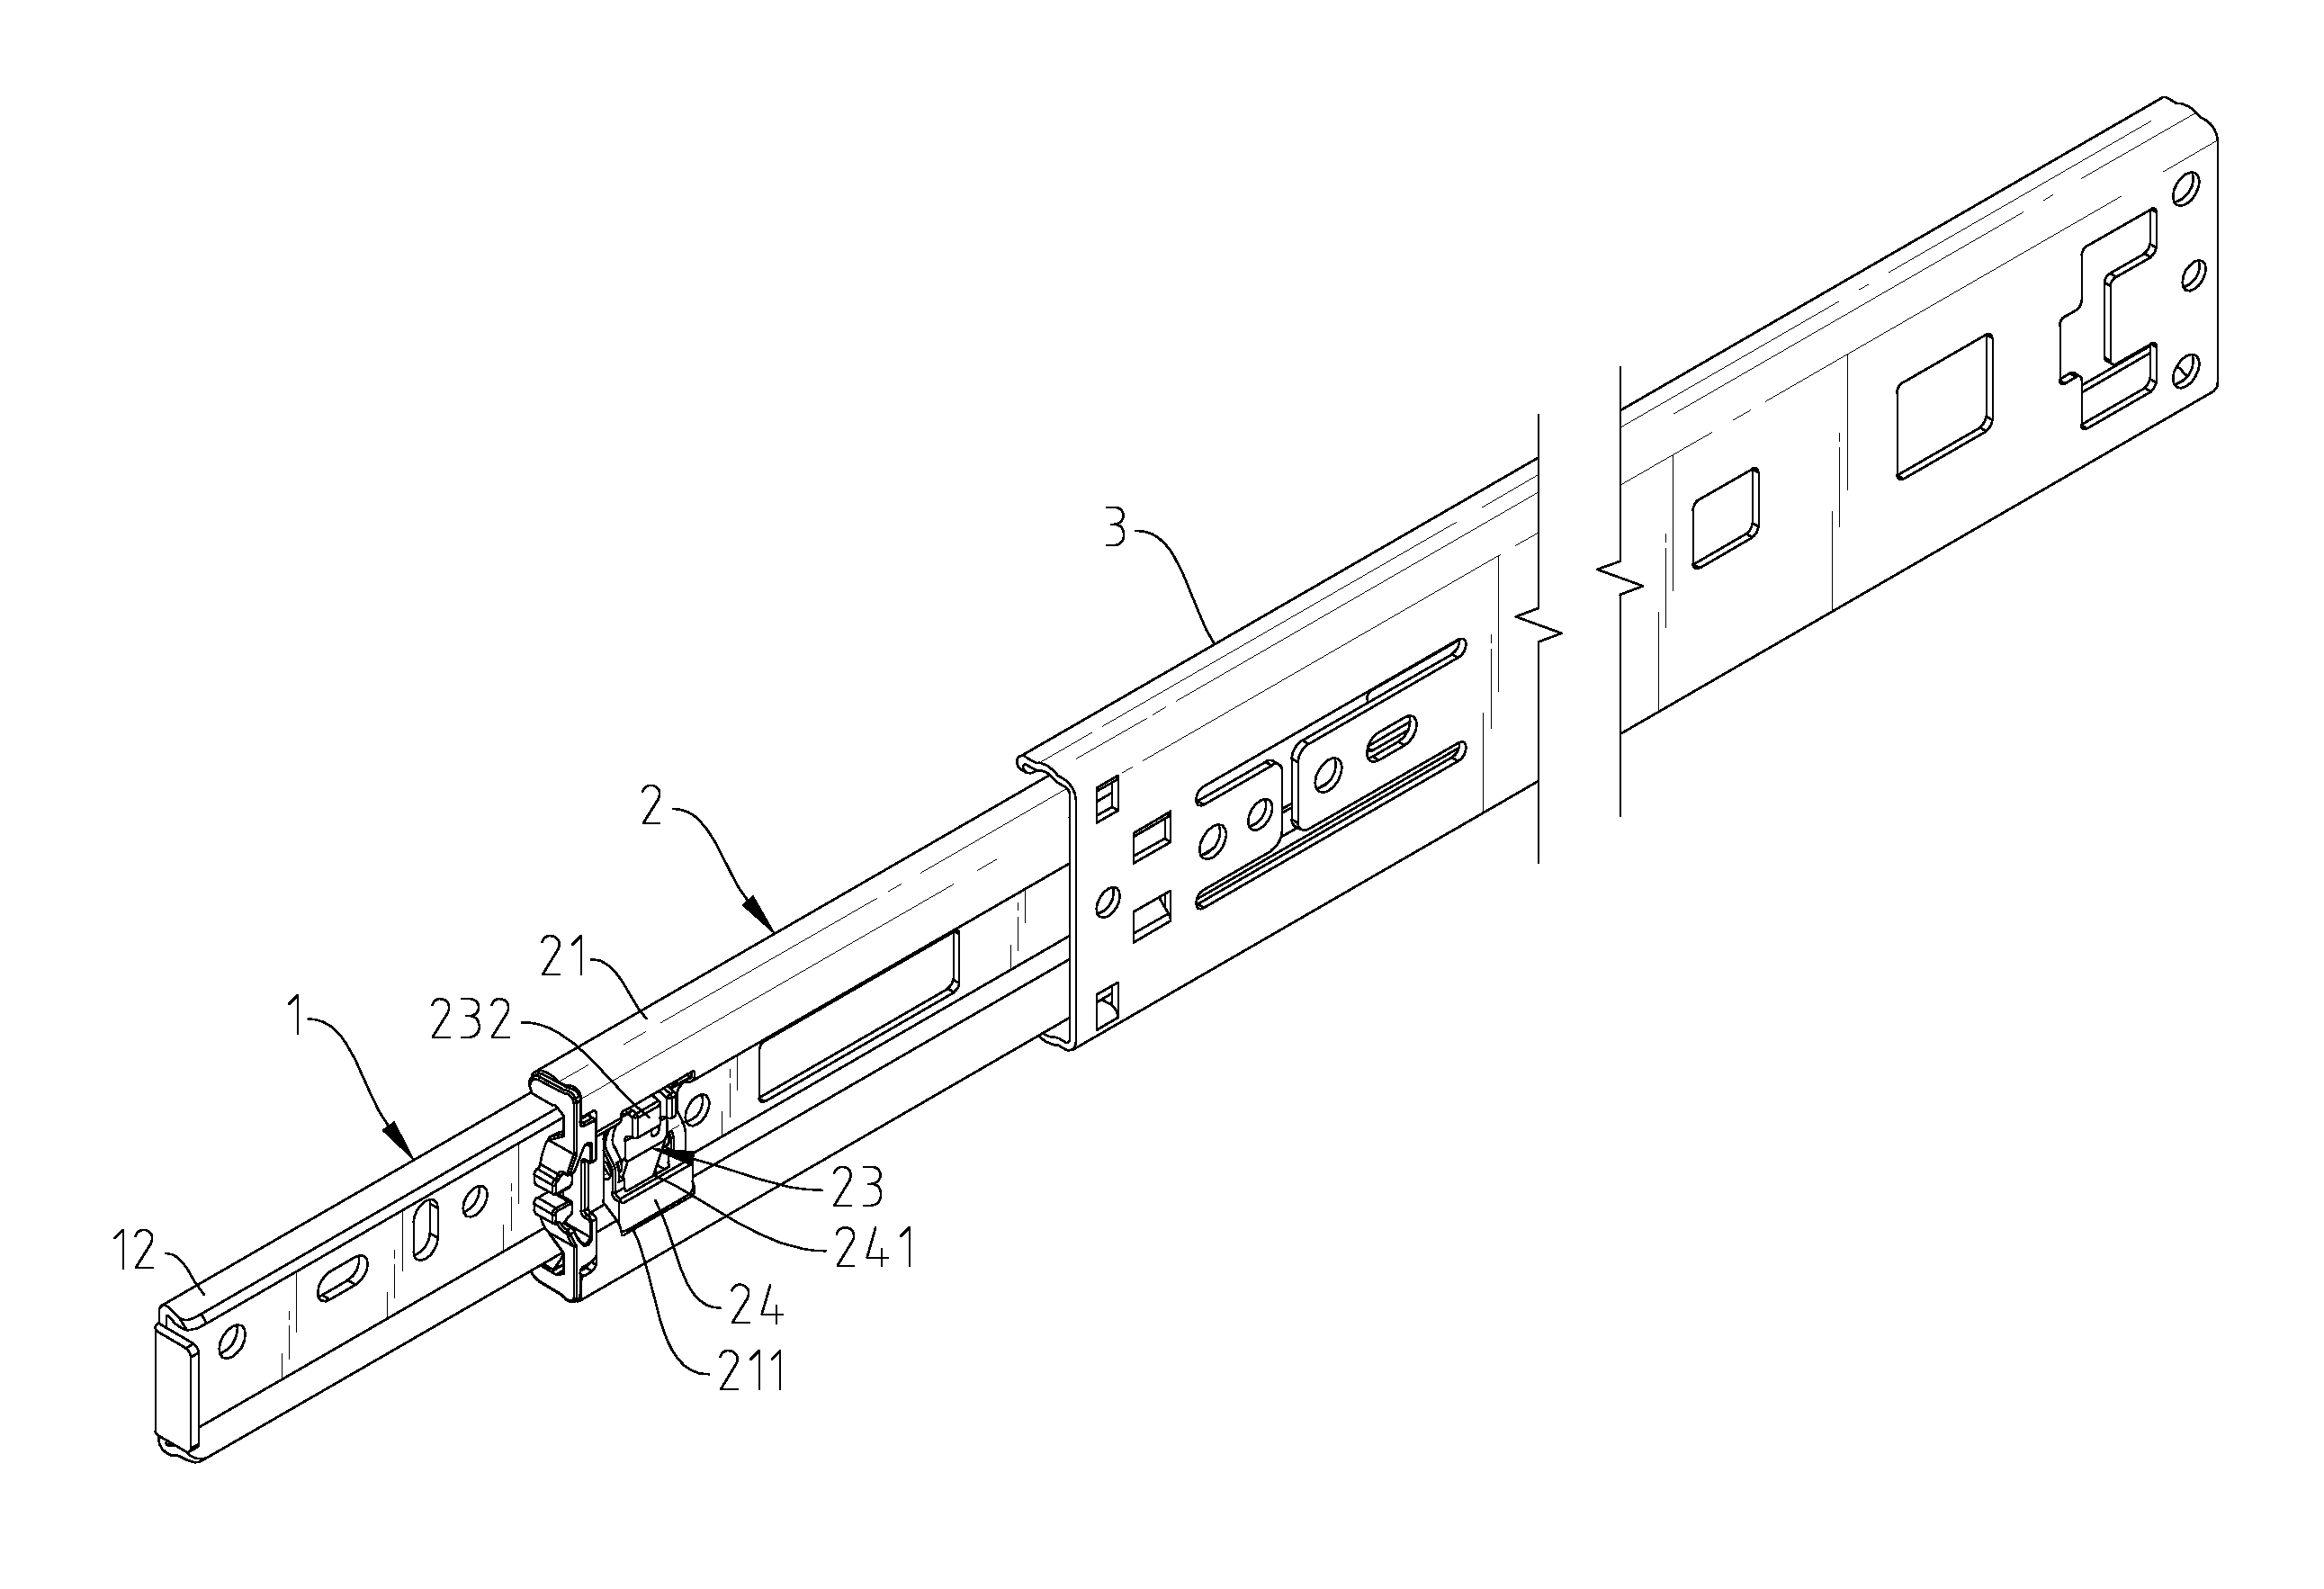 Pres-control type sliding rail assembly